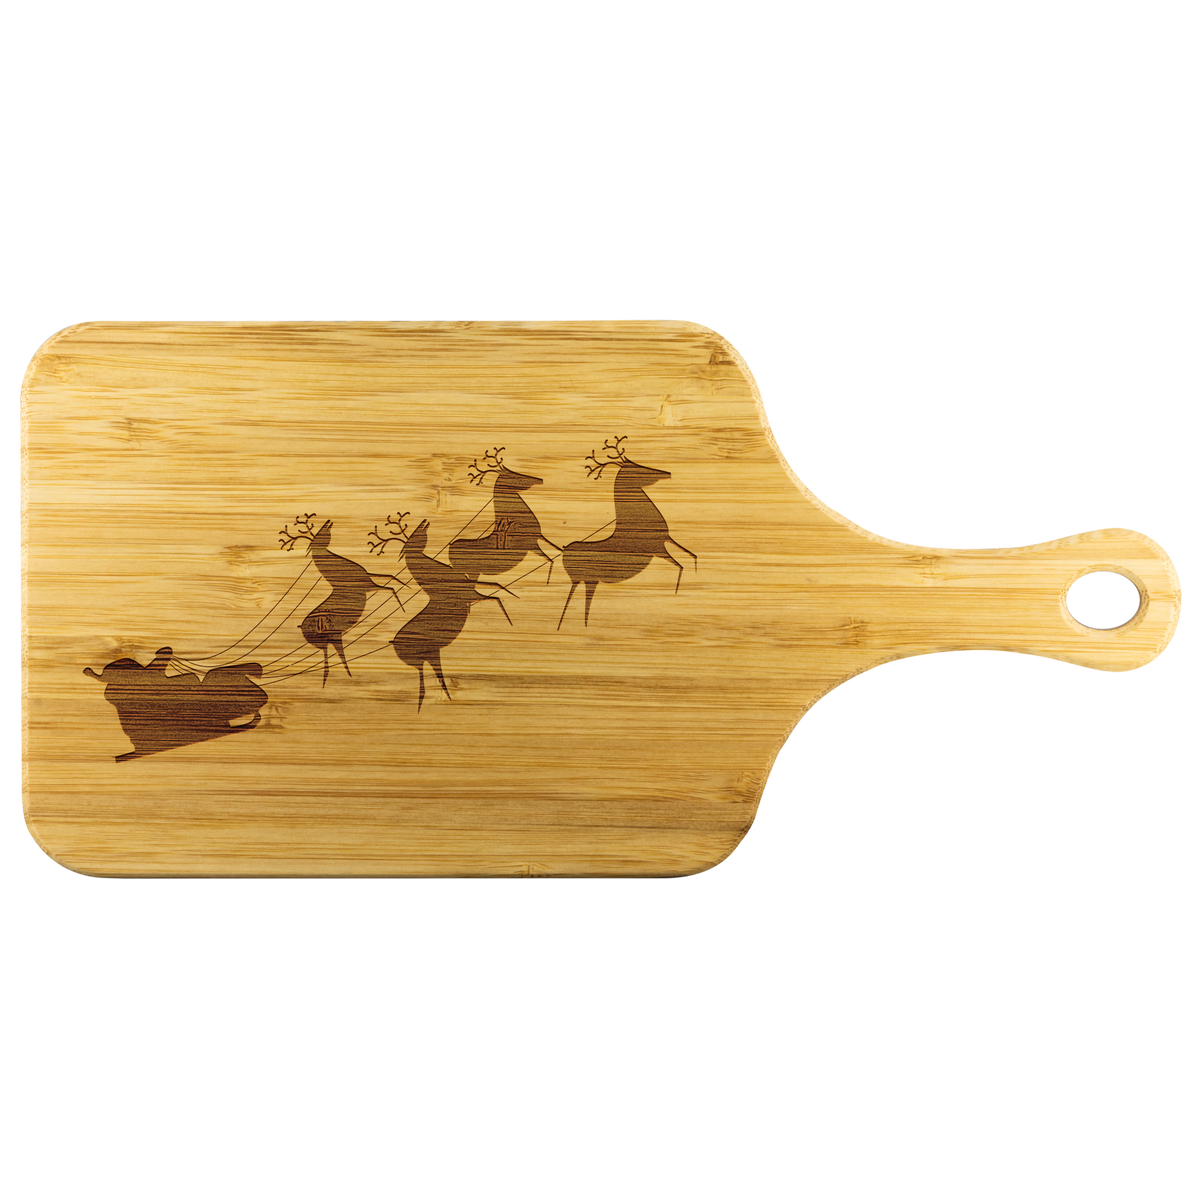 Santa Claus Reindeer Christmas Sled - Wood Cutting Board With Handle